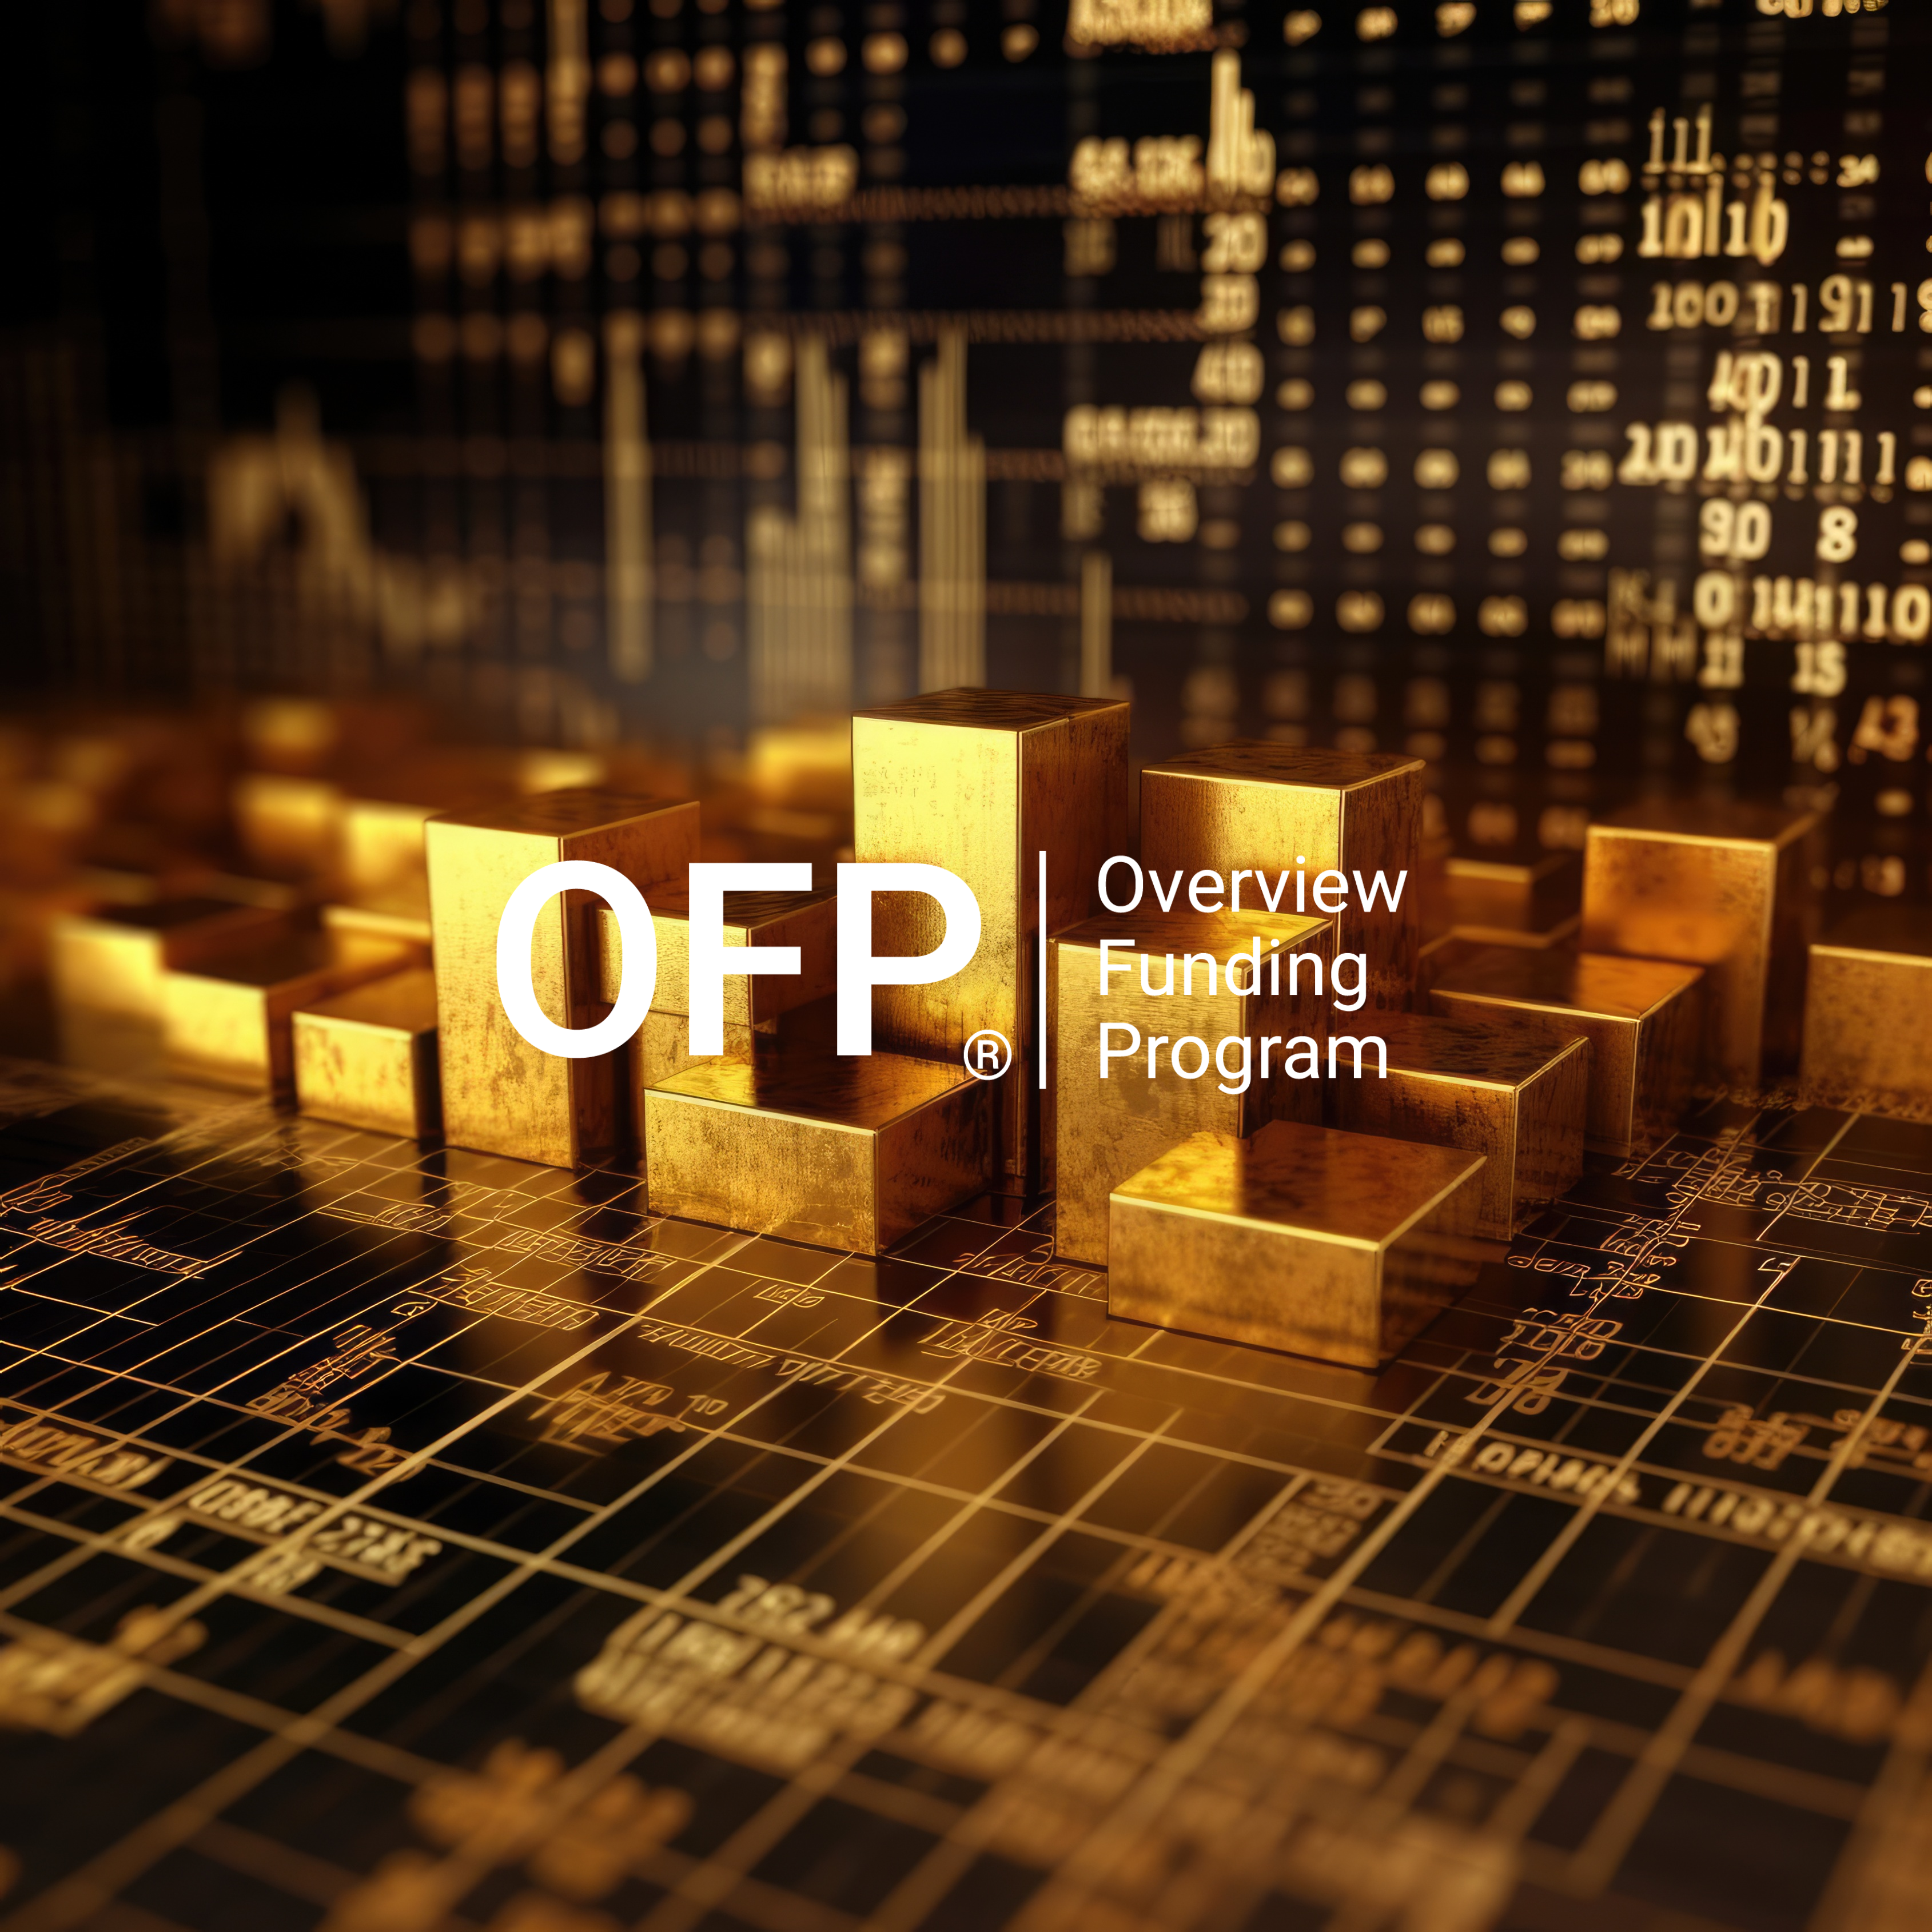 ofp funding